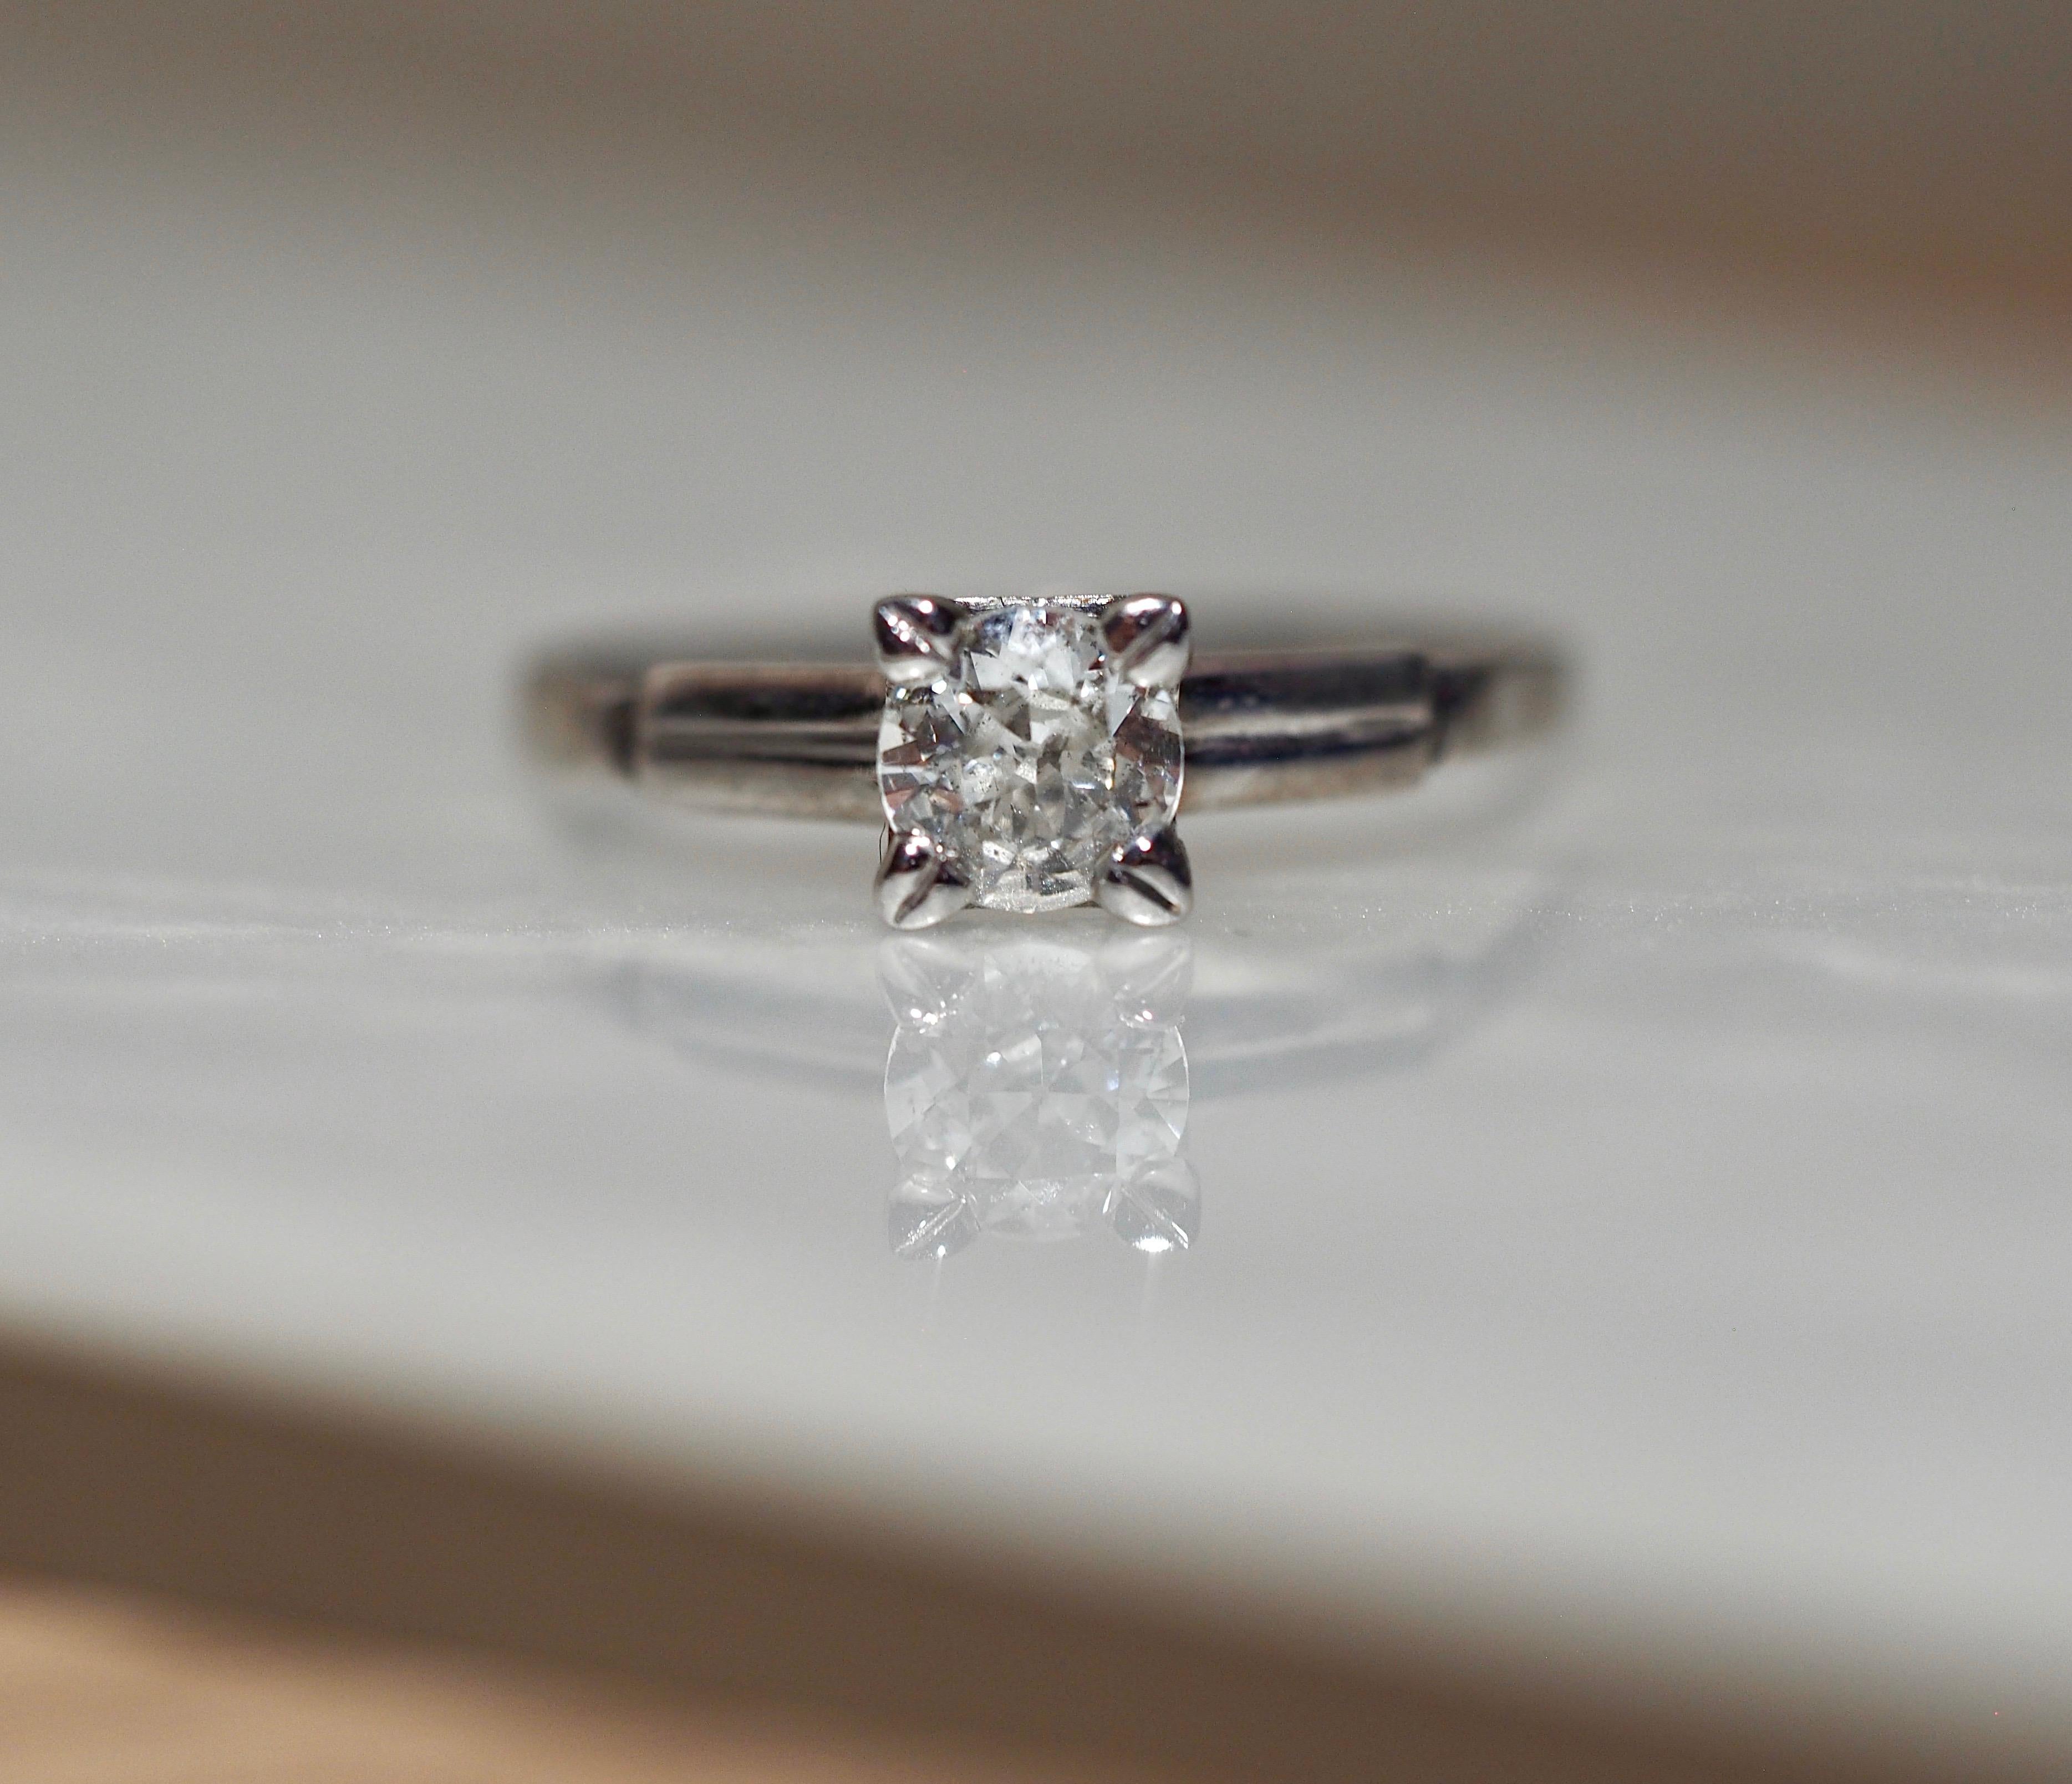 This lovely palladium vintage solitaire engagement ring features an Old European Cut Diamond set in four prongs, weighing .41 carats I1 in clarity I in color.  Shank tapers from 5.64 - 1.19 mm.  Finger size 6.75 and can be sized up or down prior to